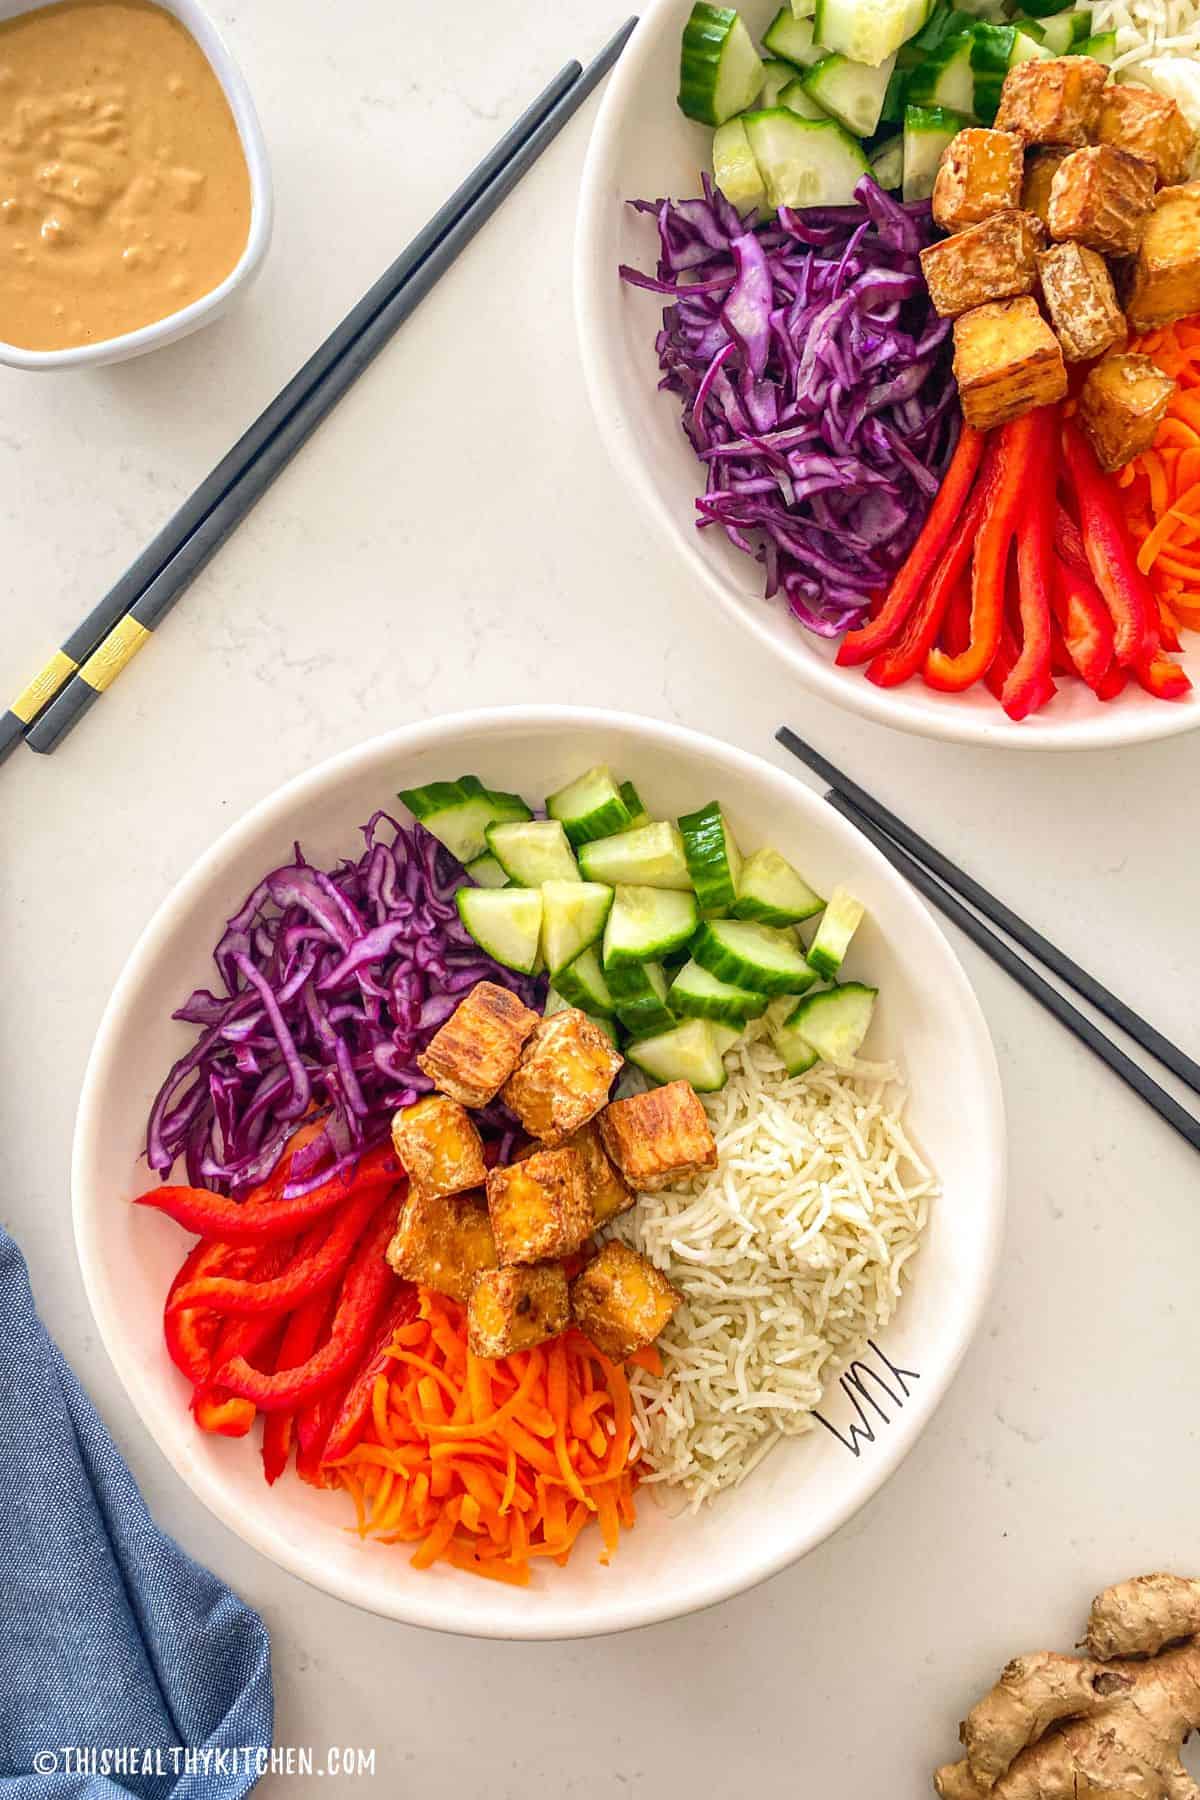 Two bowls of rice, veggies and crispy baked tofu.